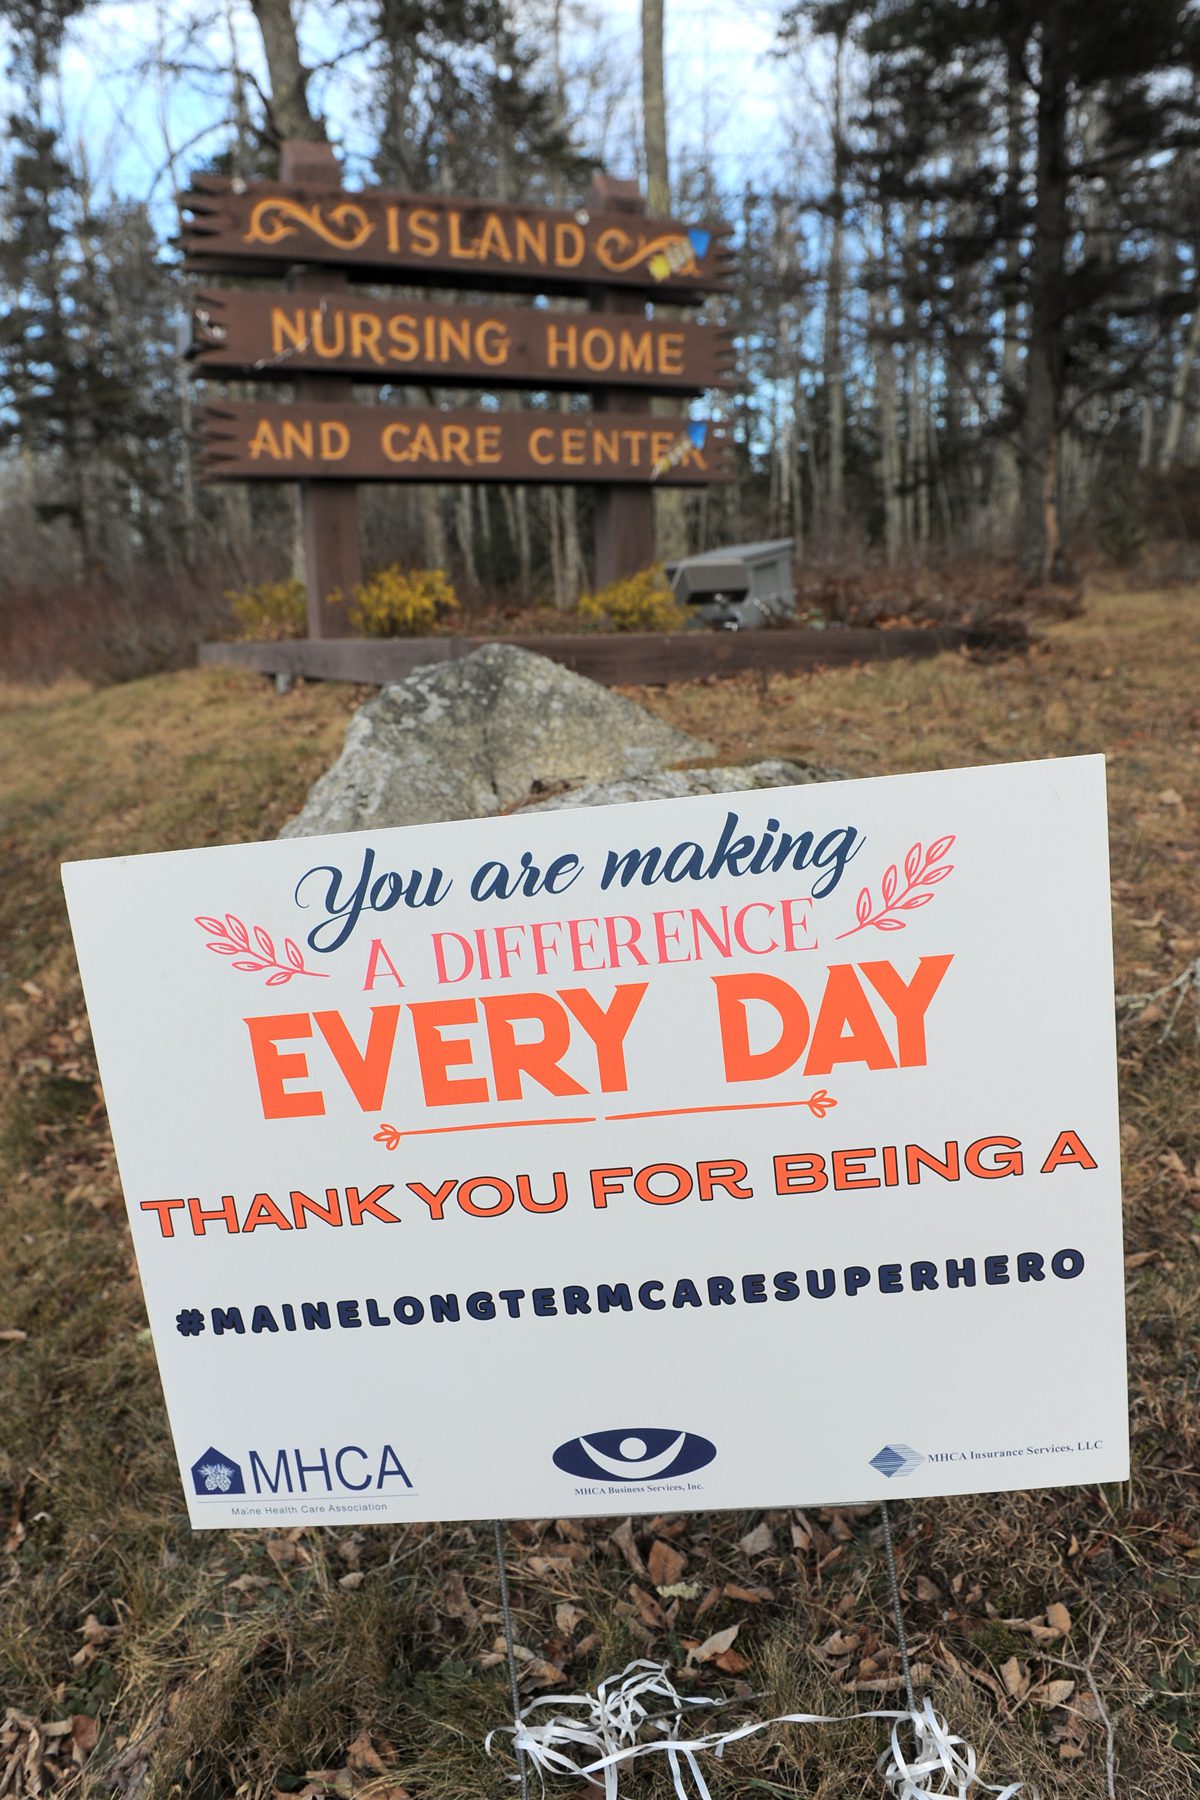 Sign outside the Island Nursing Home in Deer Isle Maine to support COVID-19 volunteers